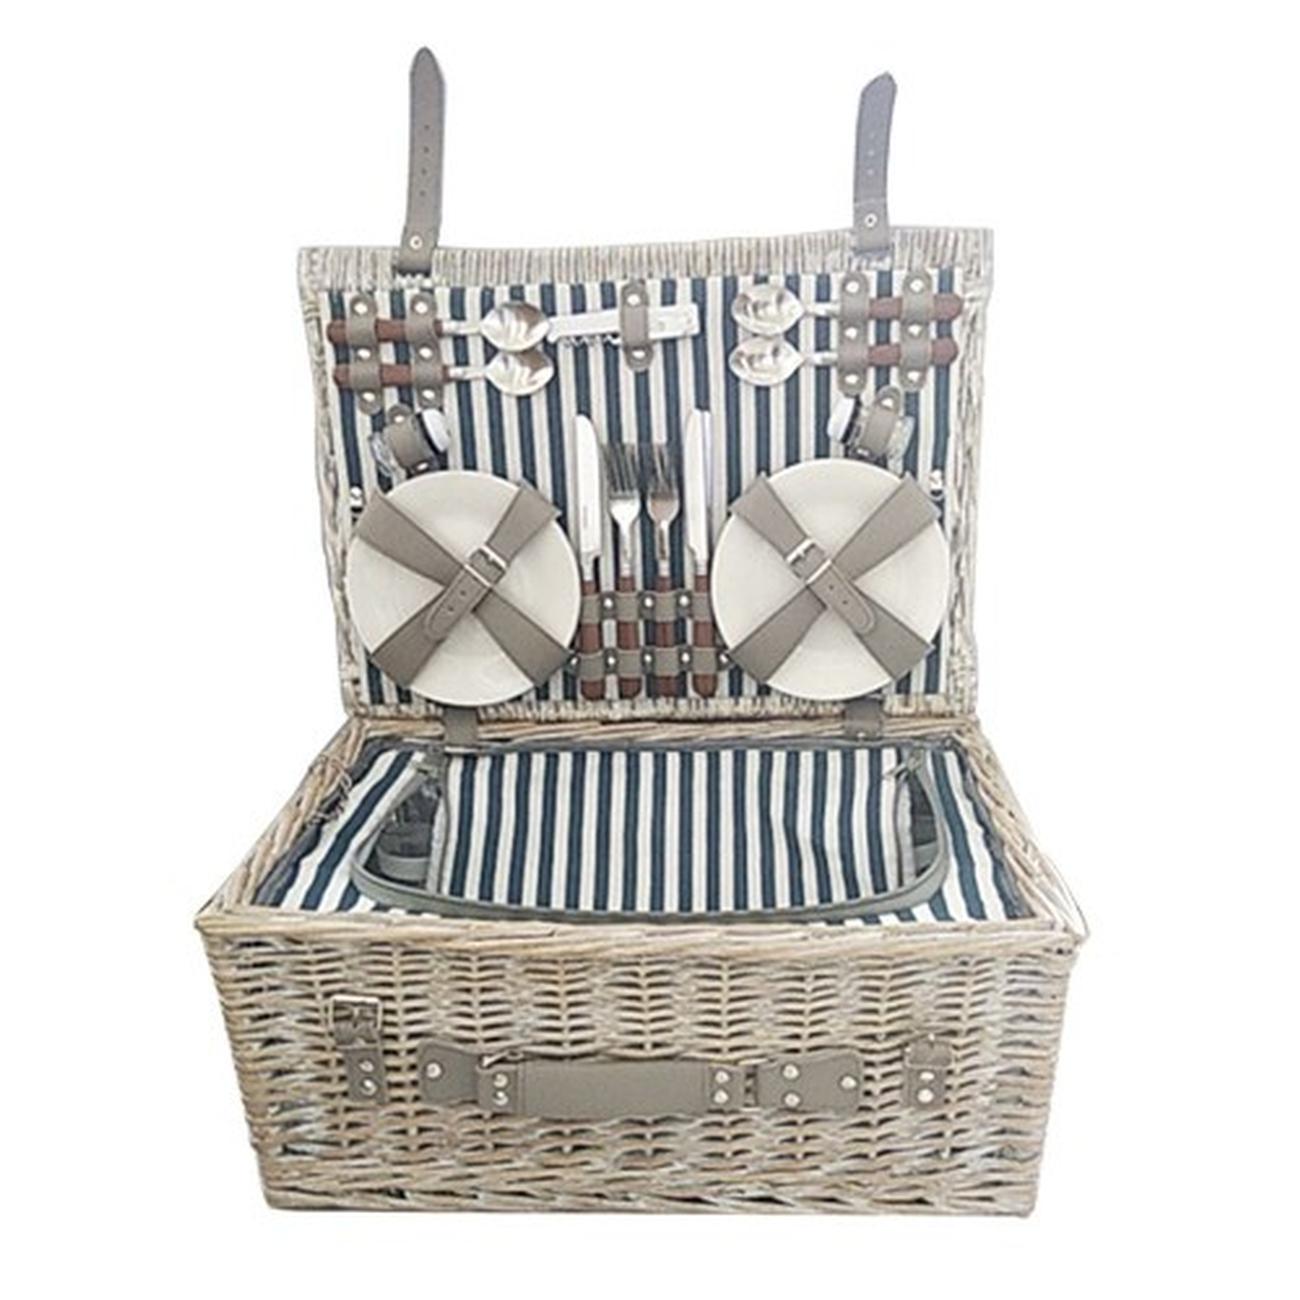 traditional-4-person-picnic-hamper-navy-stripes - Traditional Picnic Basket for 4 Navy Stripe